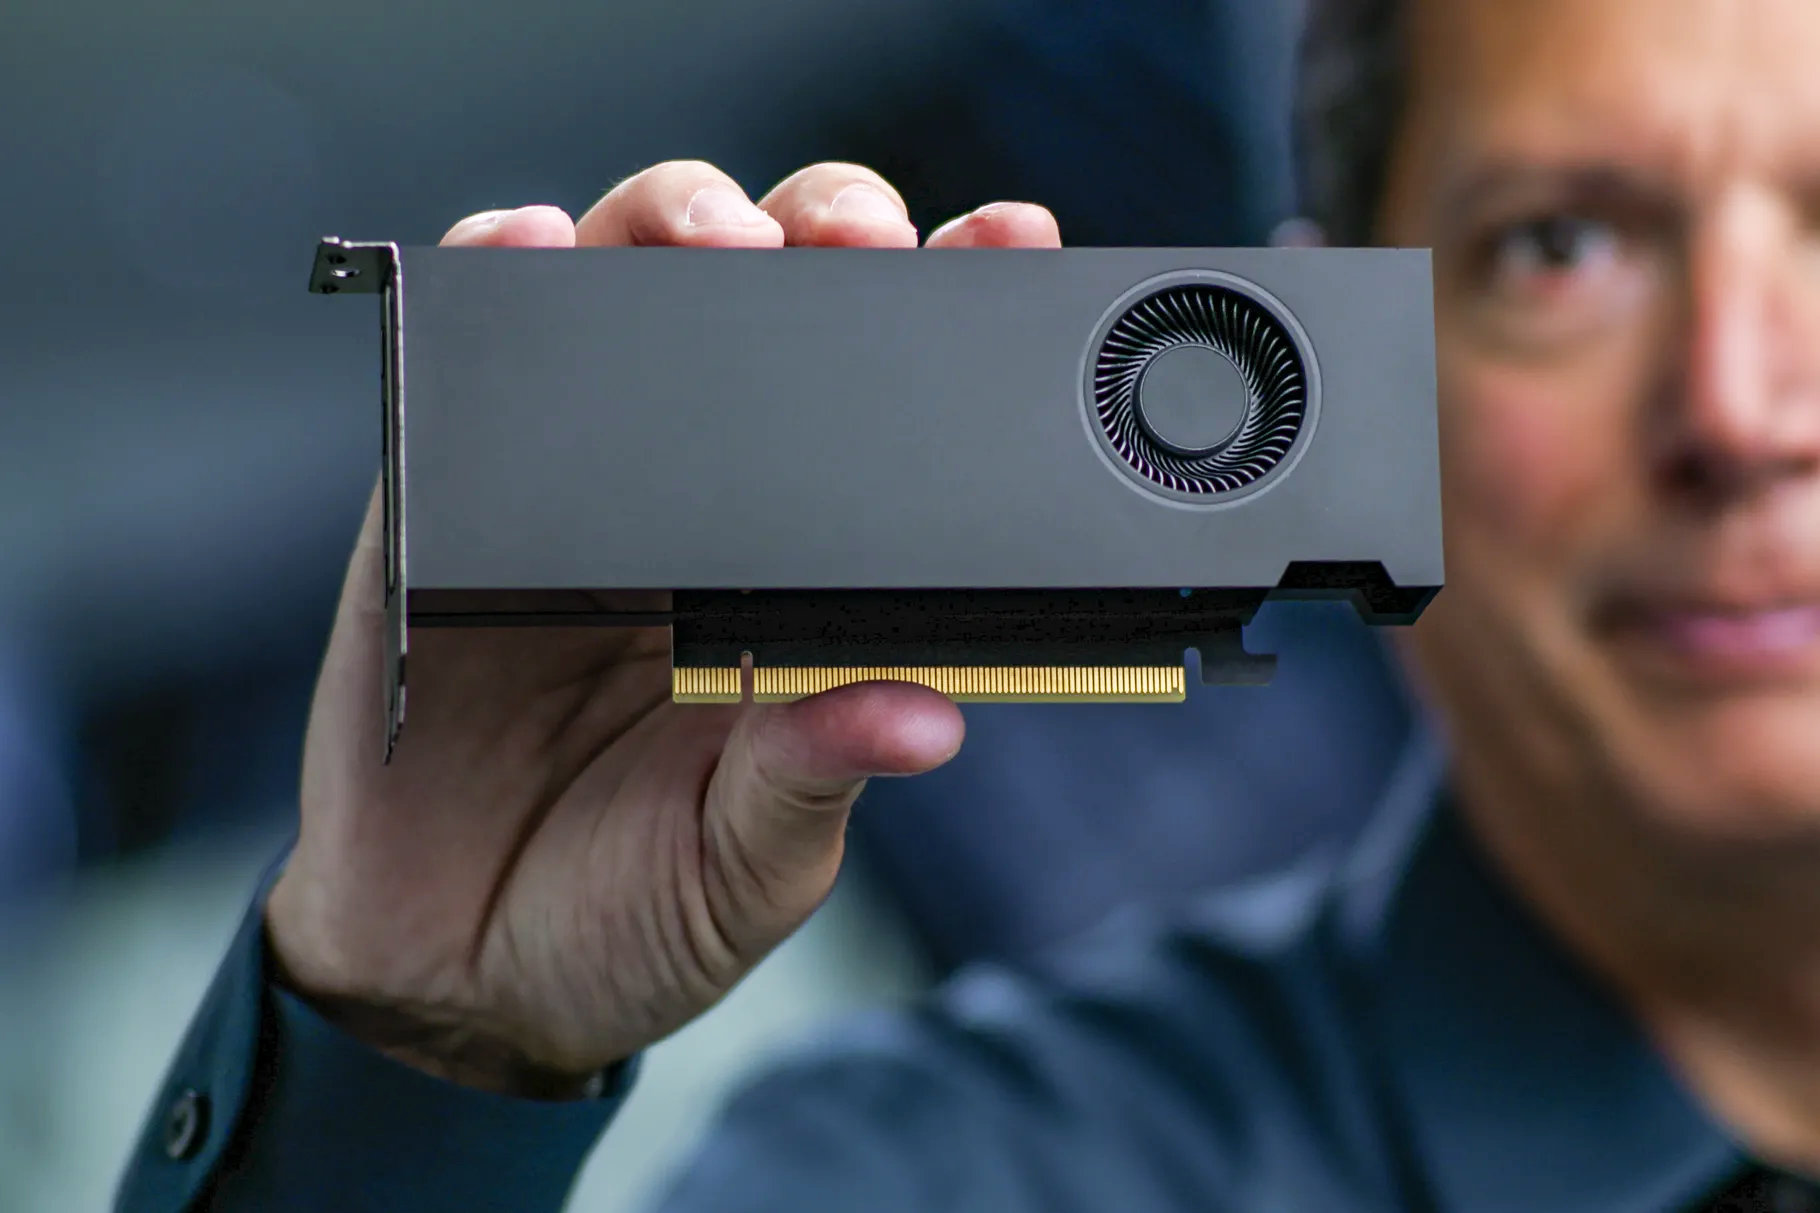 The NVIDIA RTX A2000 is the most compact and frugal Ampere 